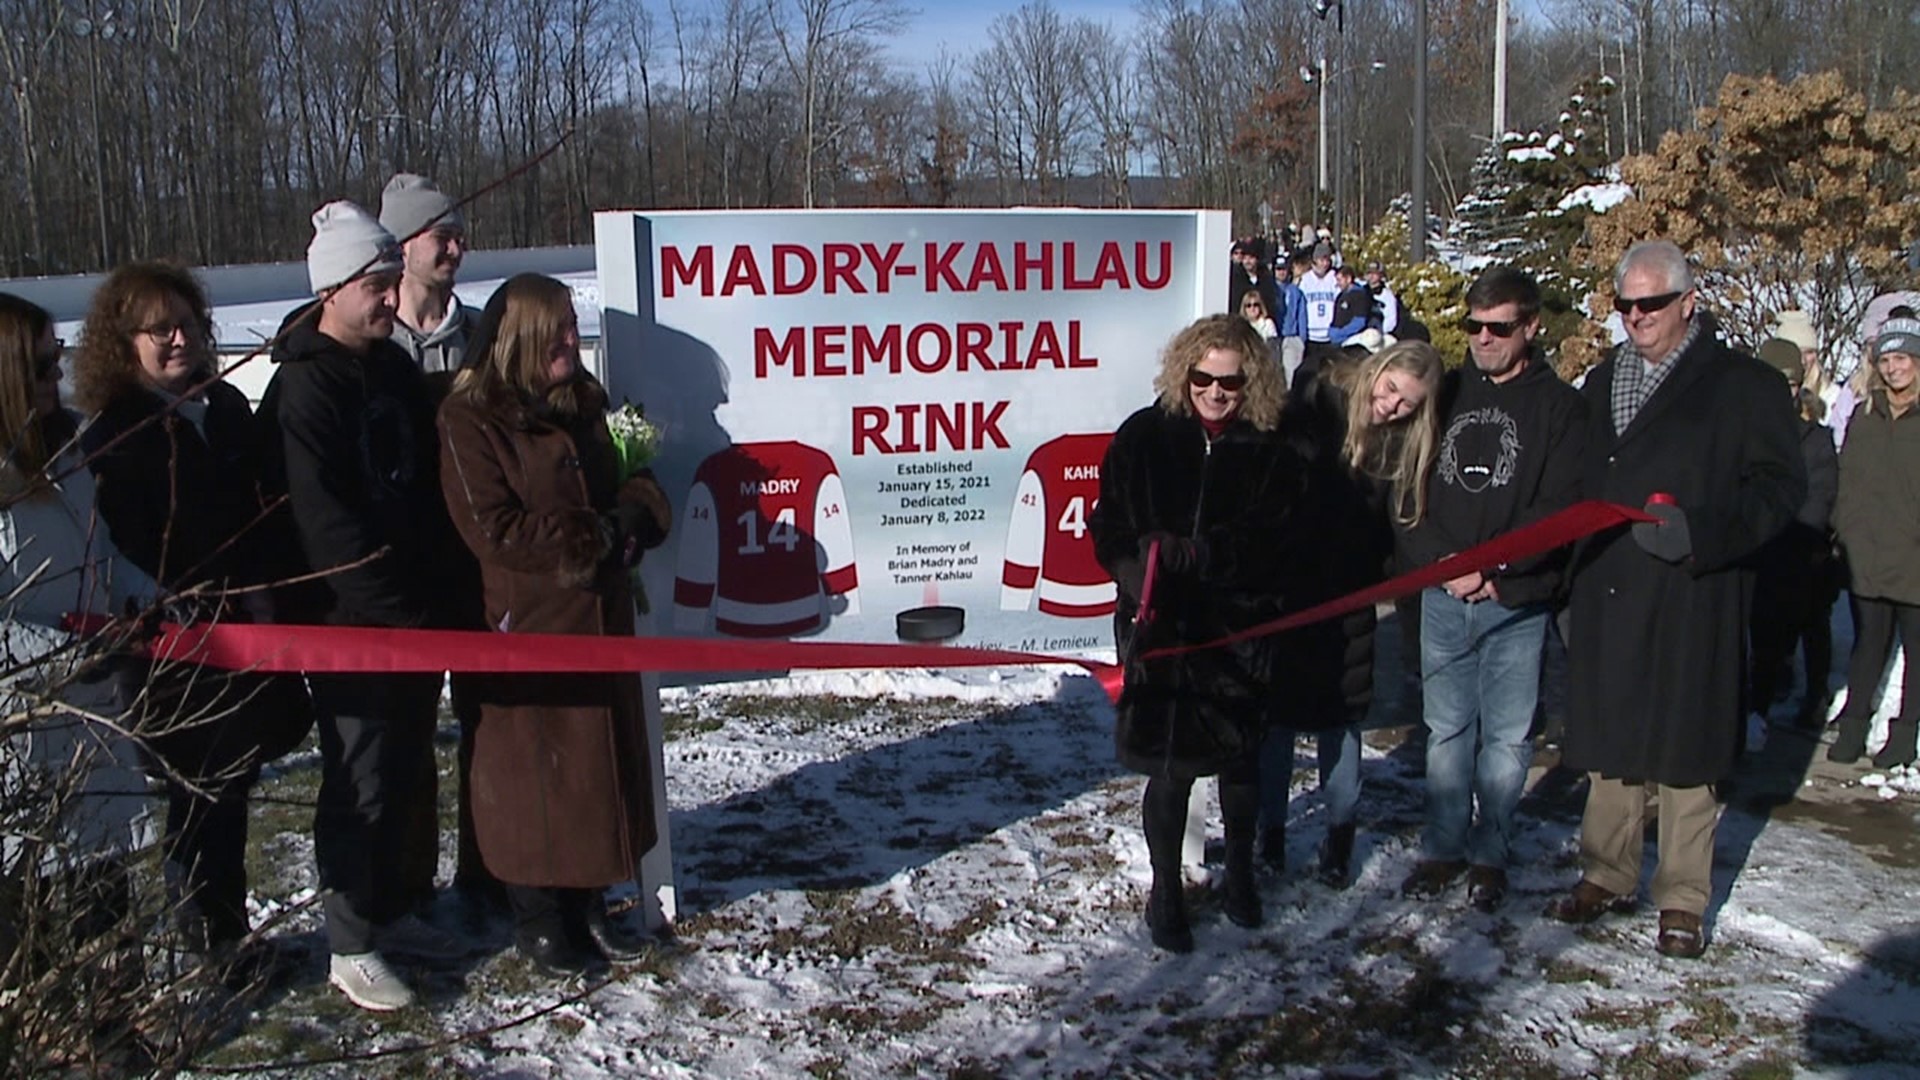 The memorial took place at the ice rink in Wright Township at 2 p.m. on Saturday.